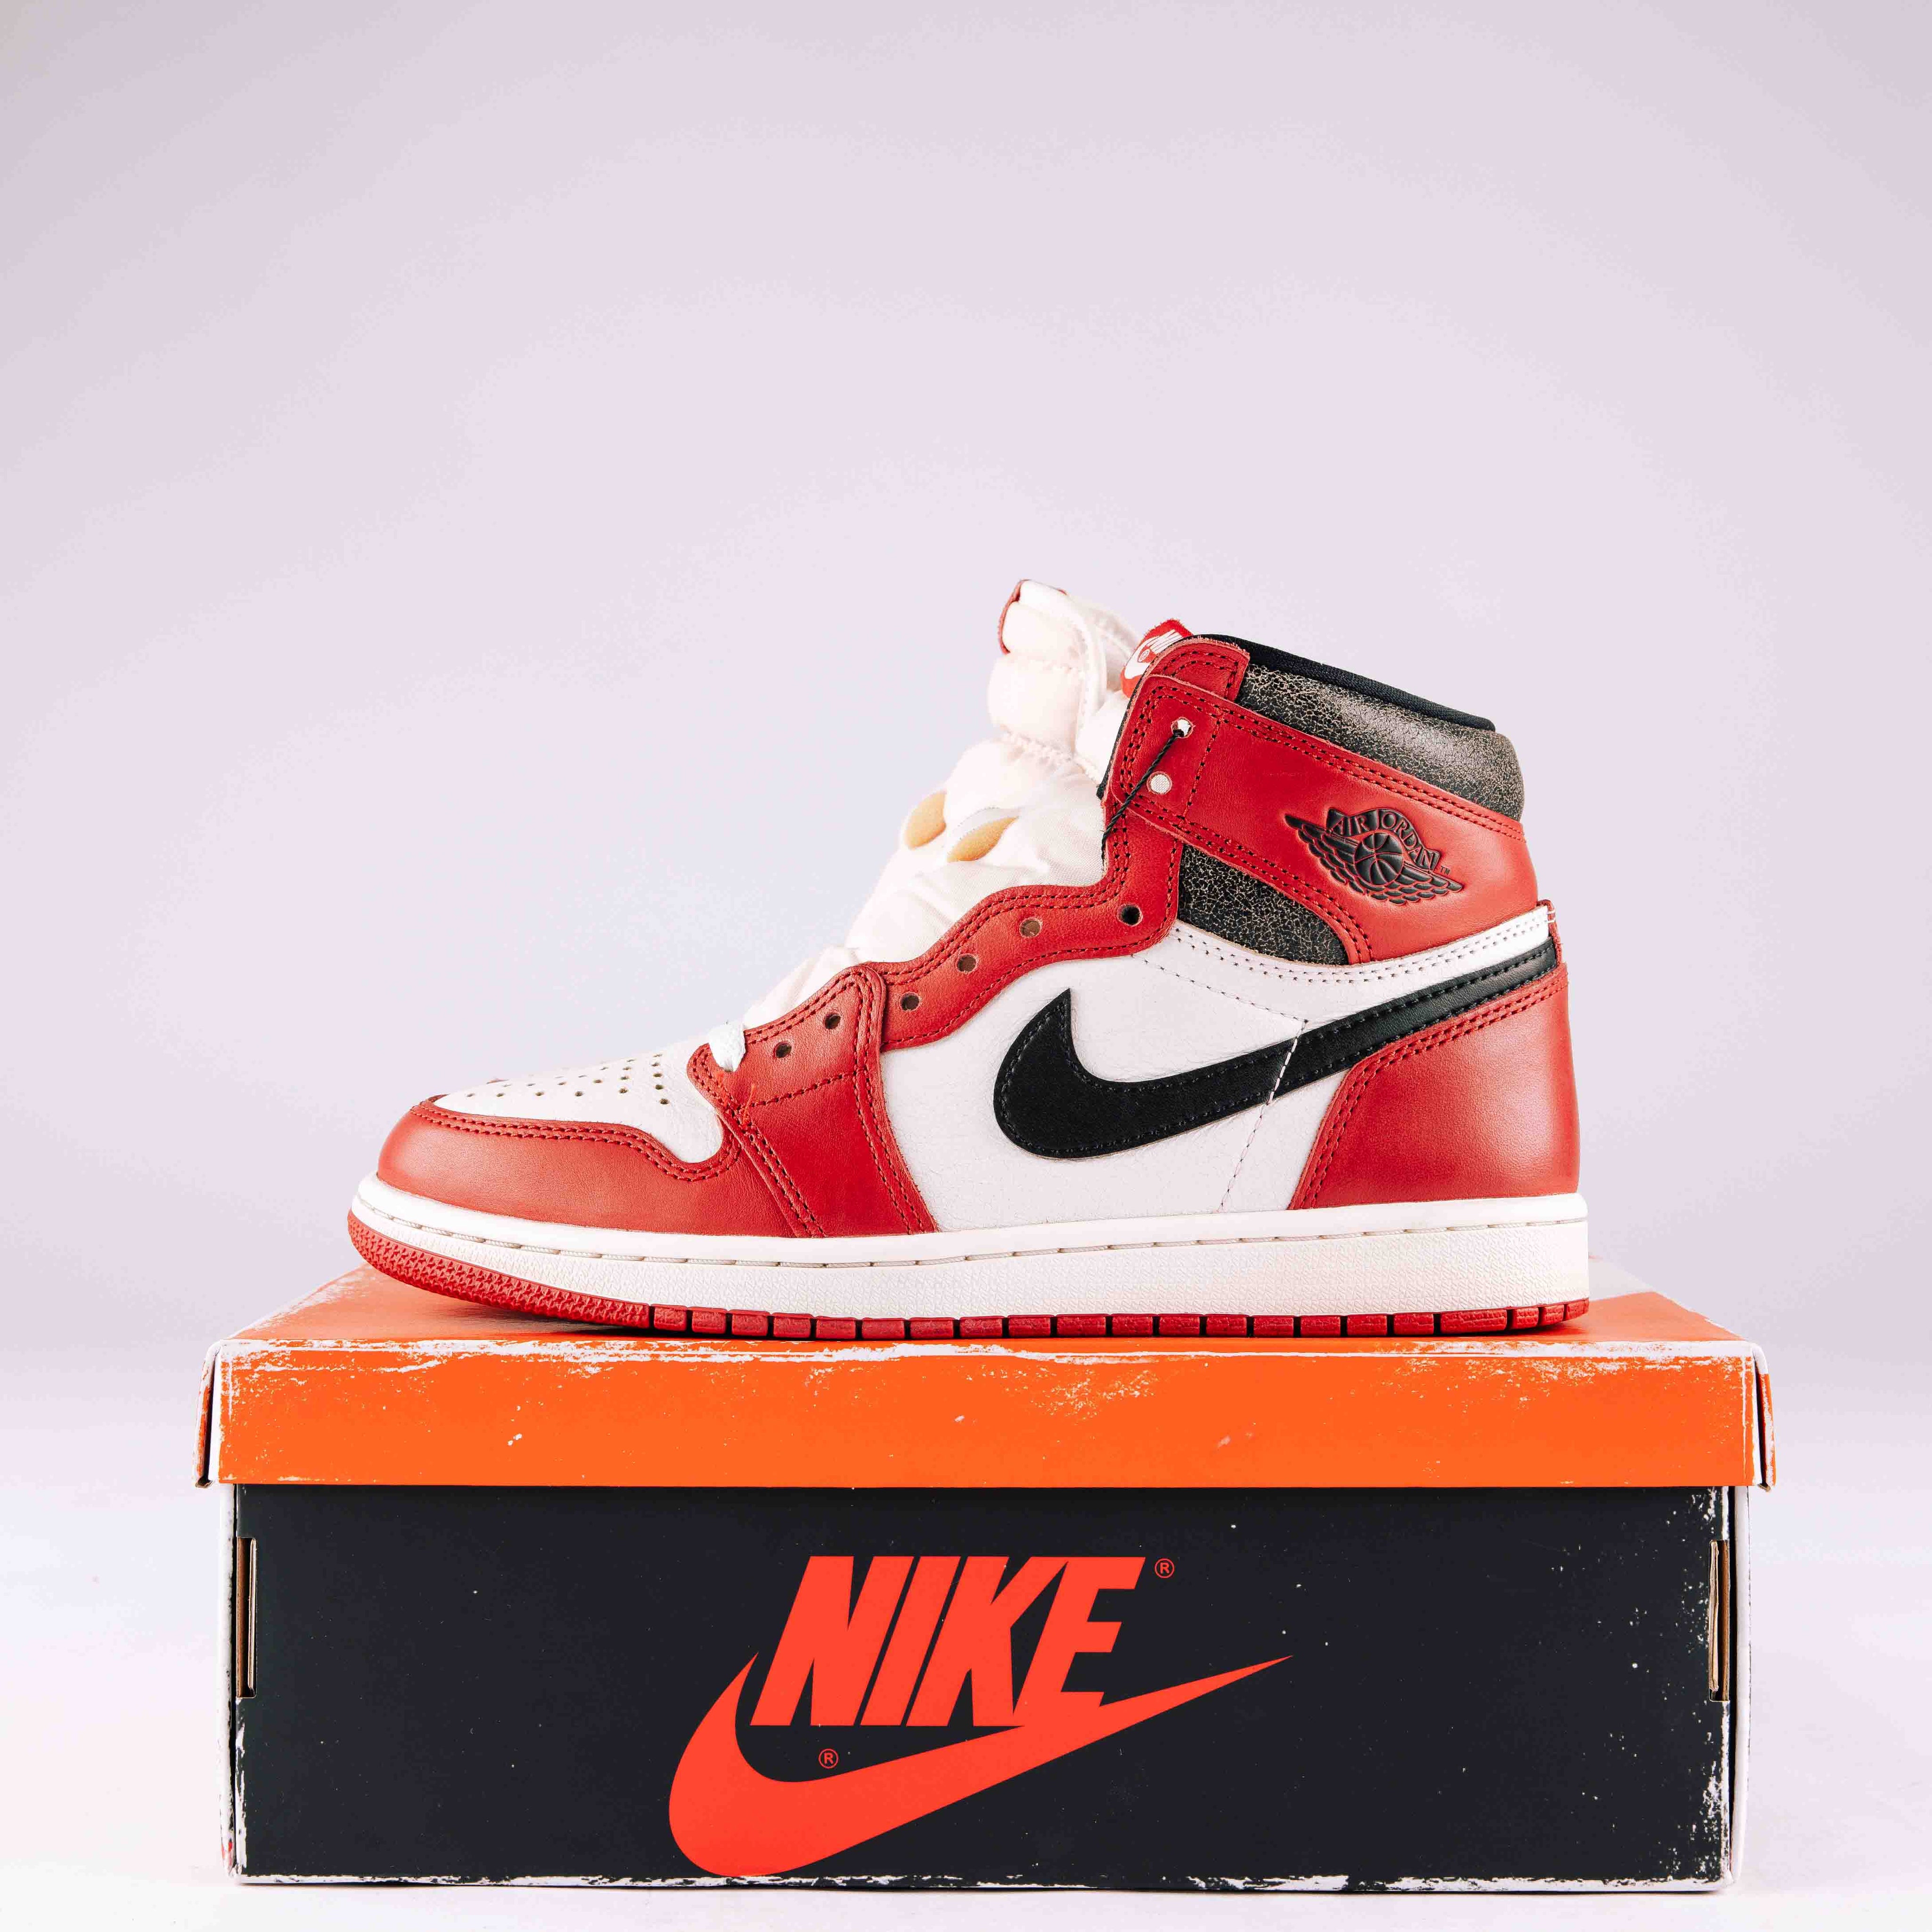 Jordan 1 Retro High OG Chicago Lost and Found (Used)